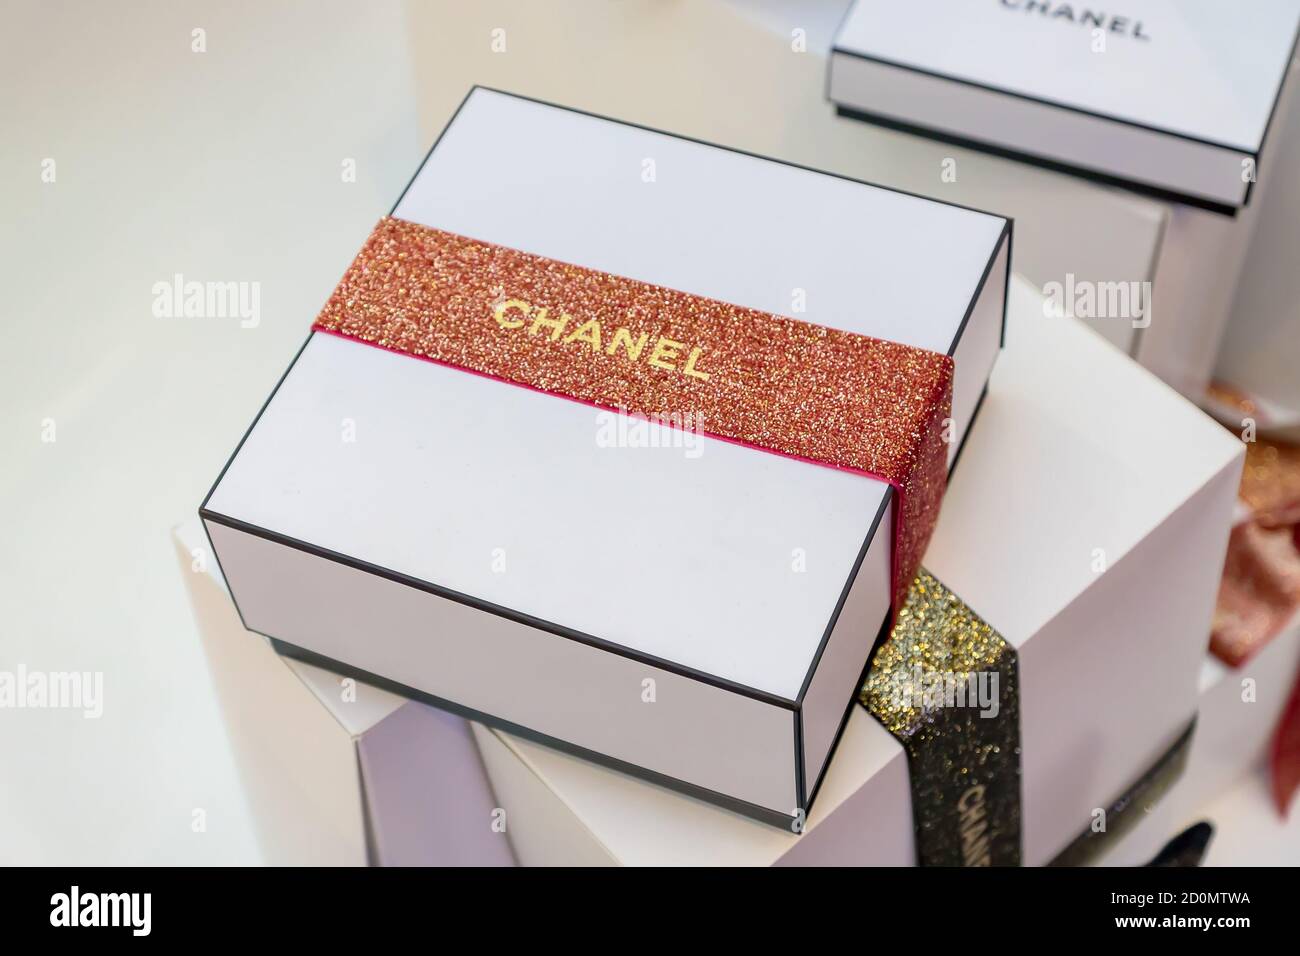 Moscow, Russia - December 18, 2019: Chanel gift boxes on the shop display  for sale, luxury presents for holidays Stock Photo - Alamy